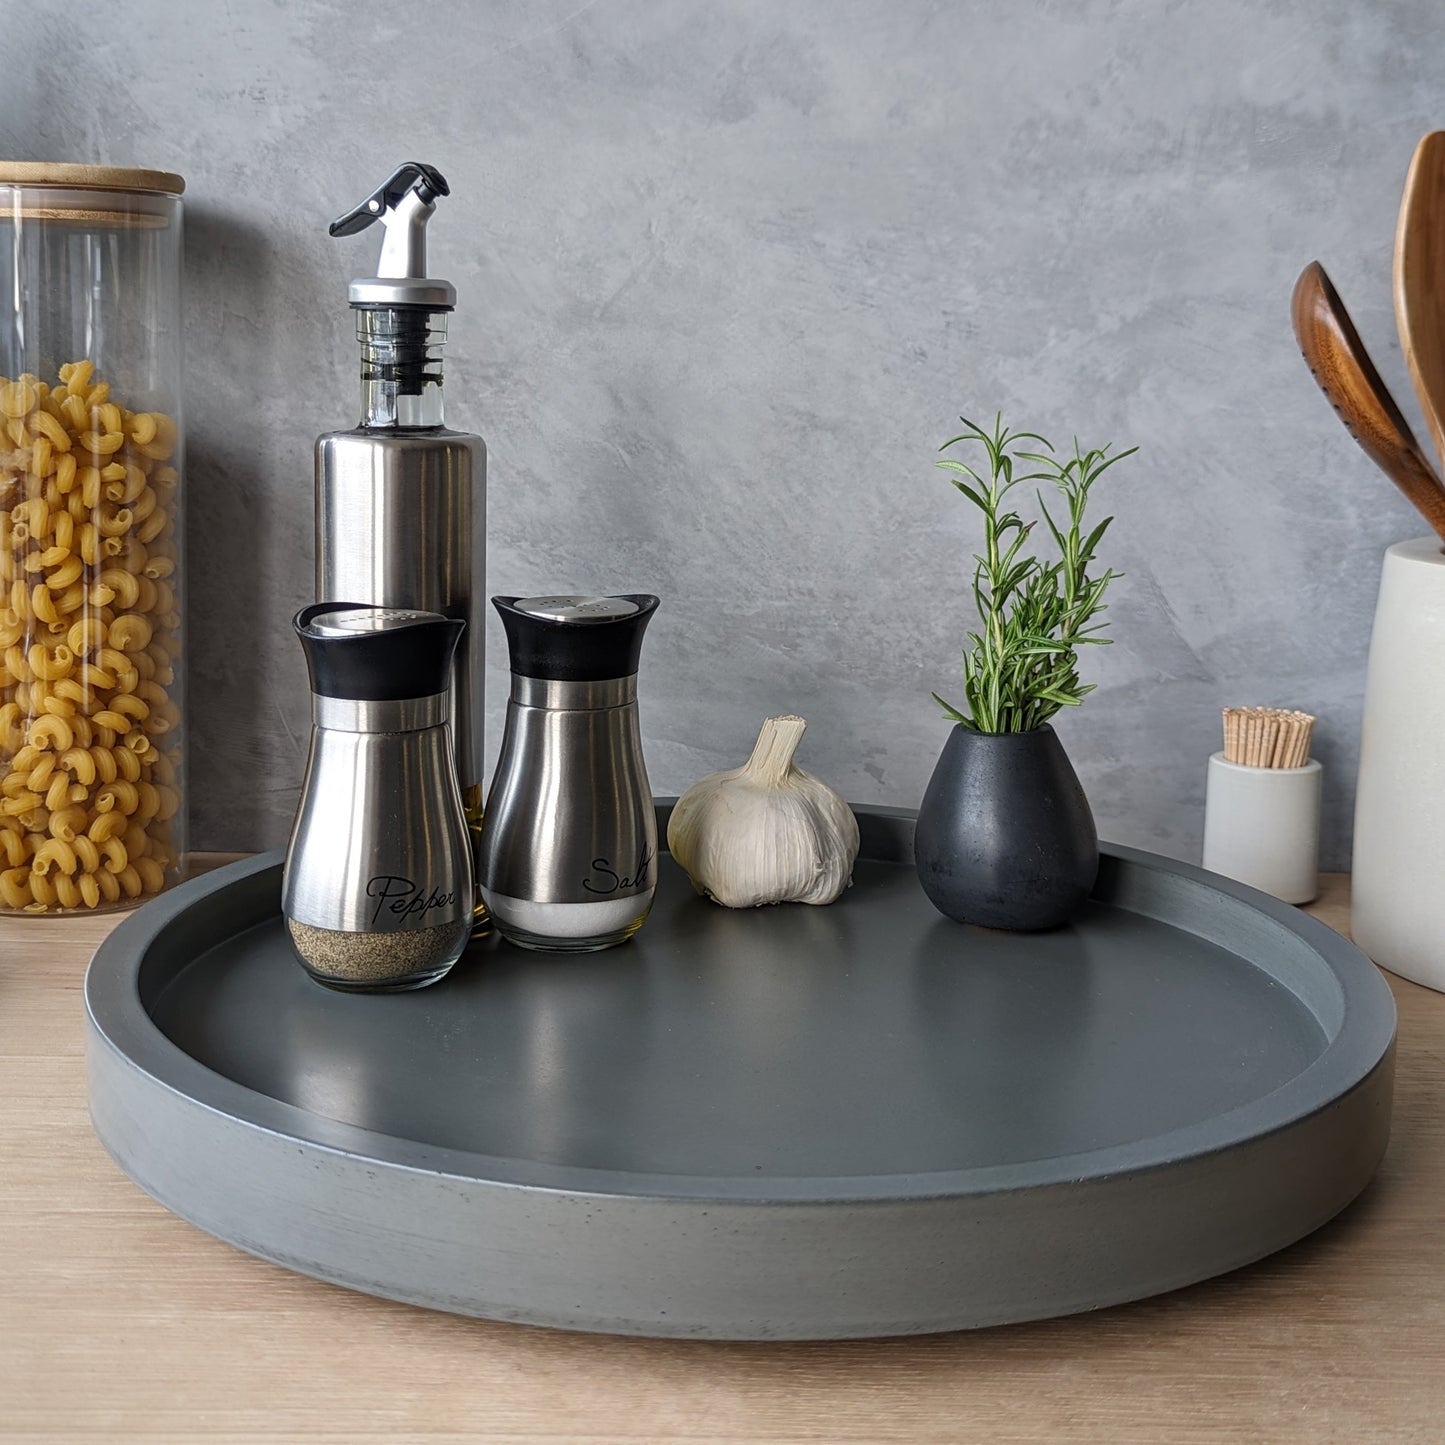 13.5" or 15" Concrete Lazy Susan Turntable